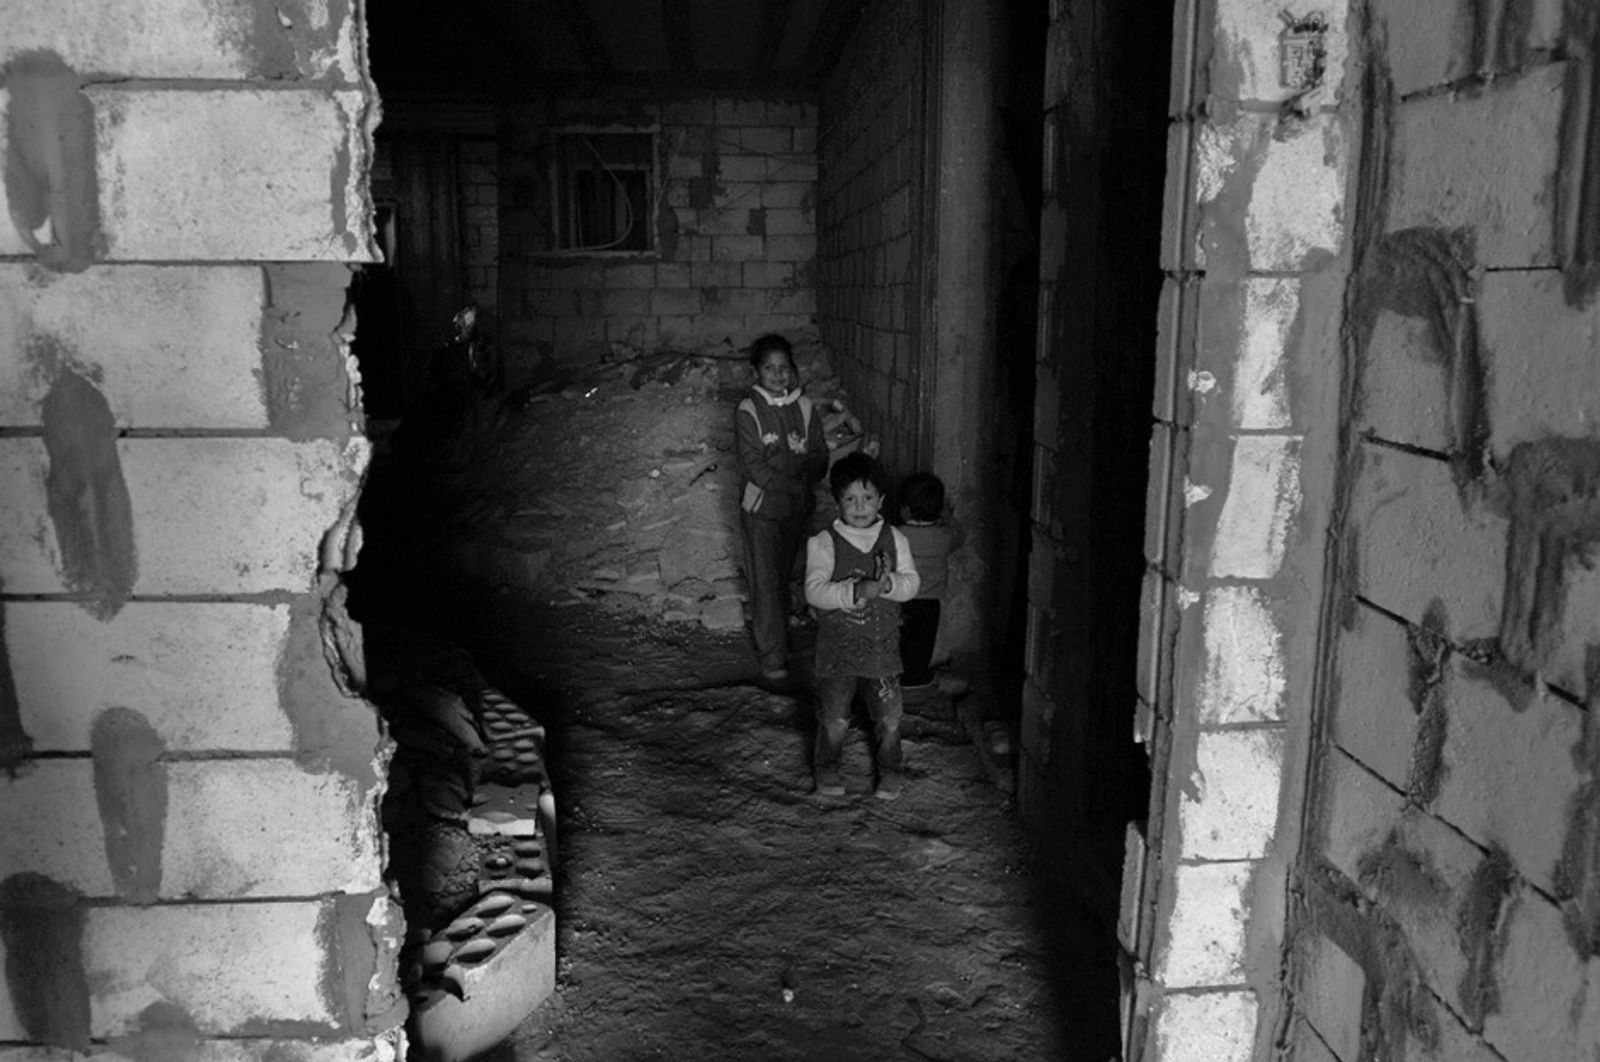 © Stephen Boyle - Image from the Welcome To Lebanon photography project